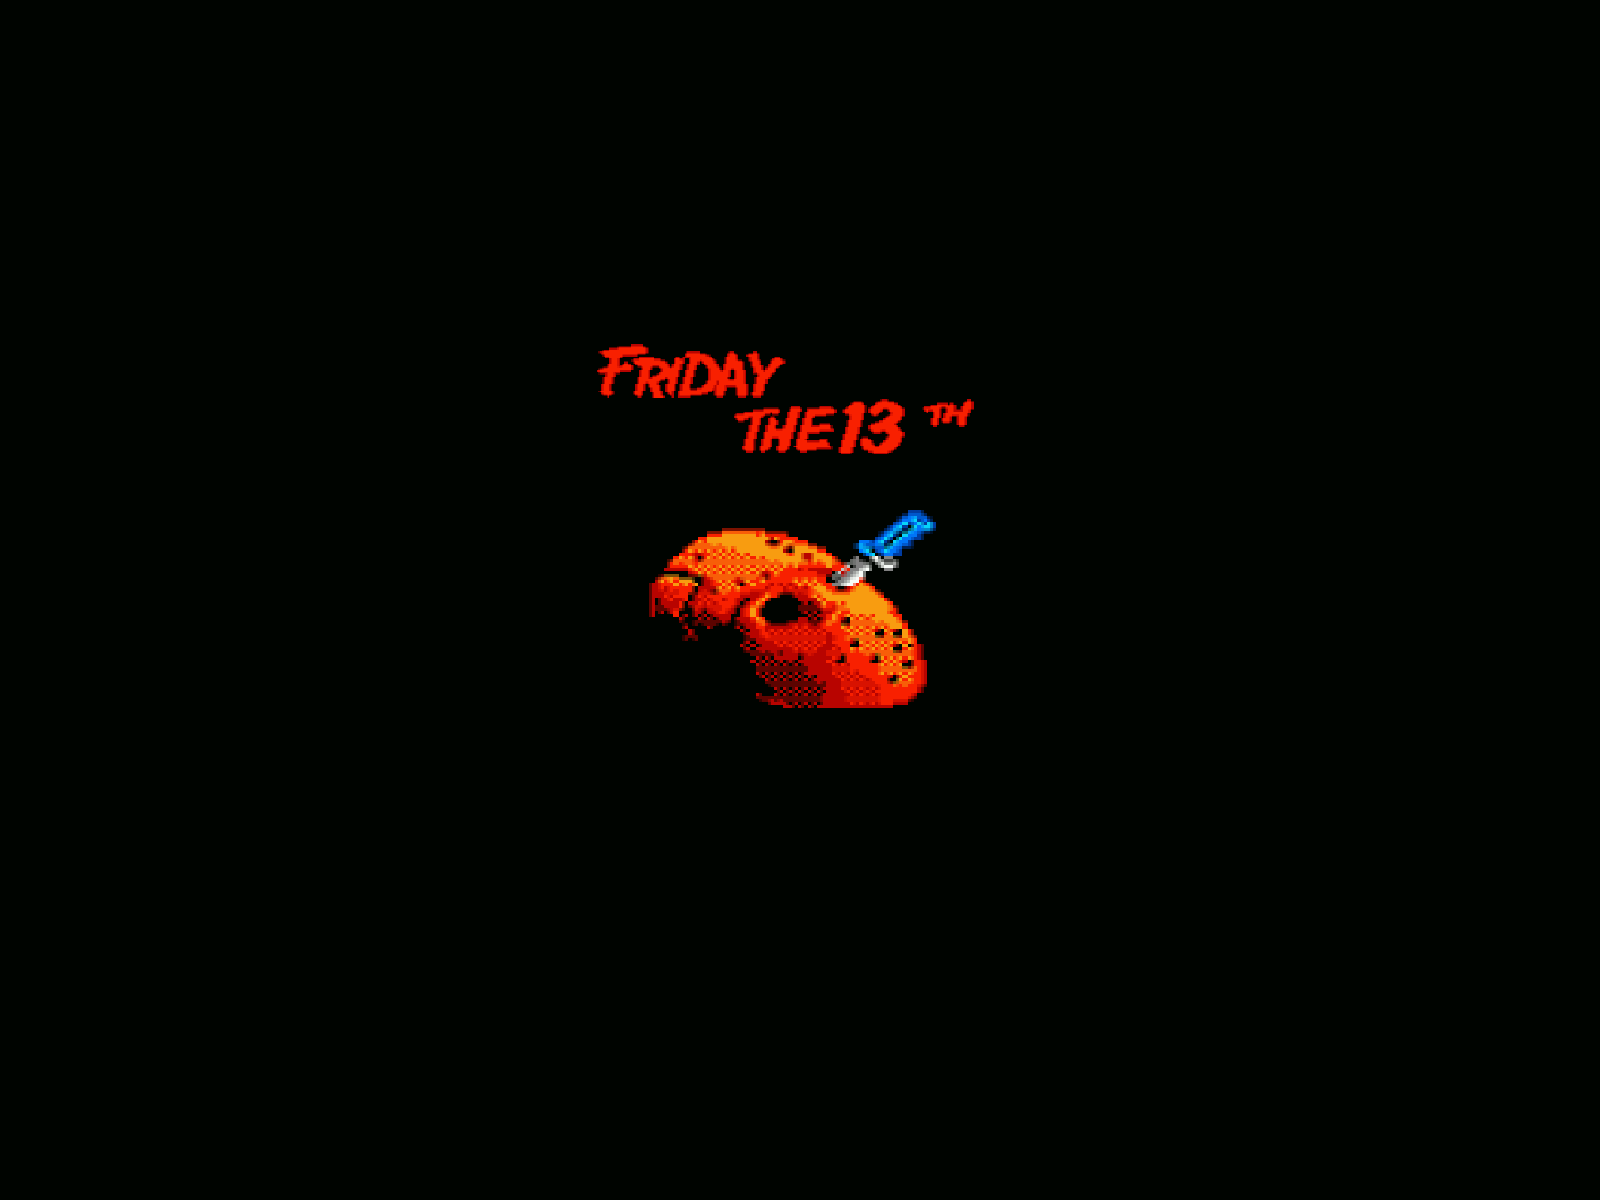 Friday-the-13th-wallpaper | The Retroist